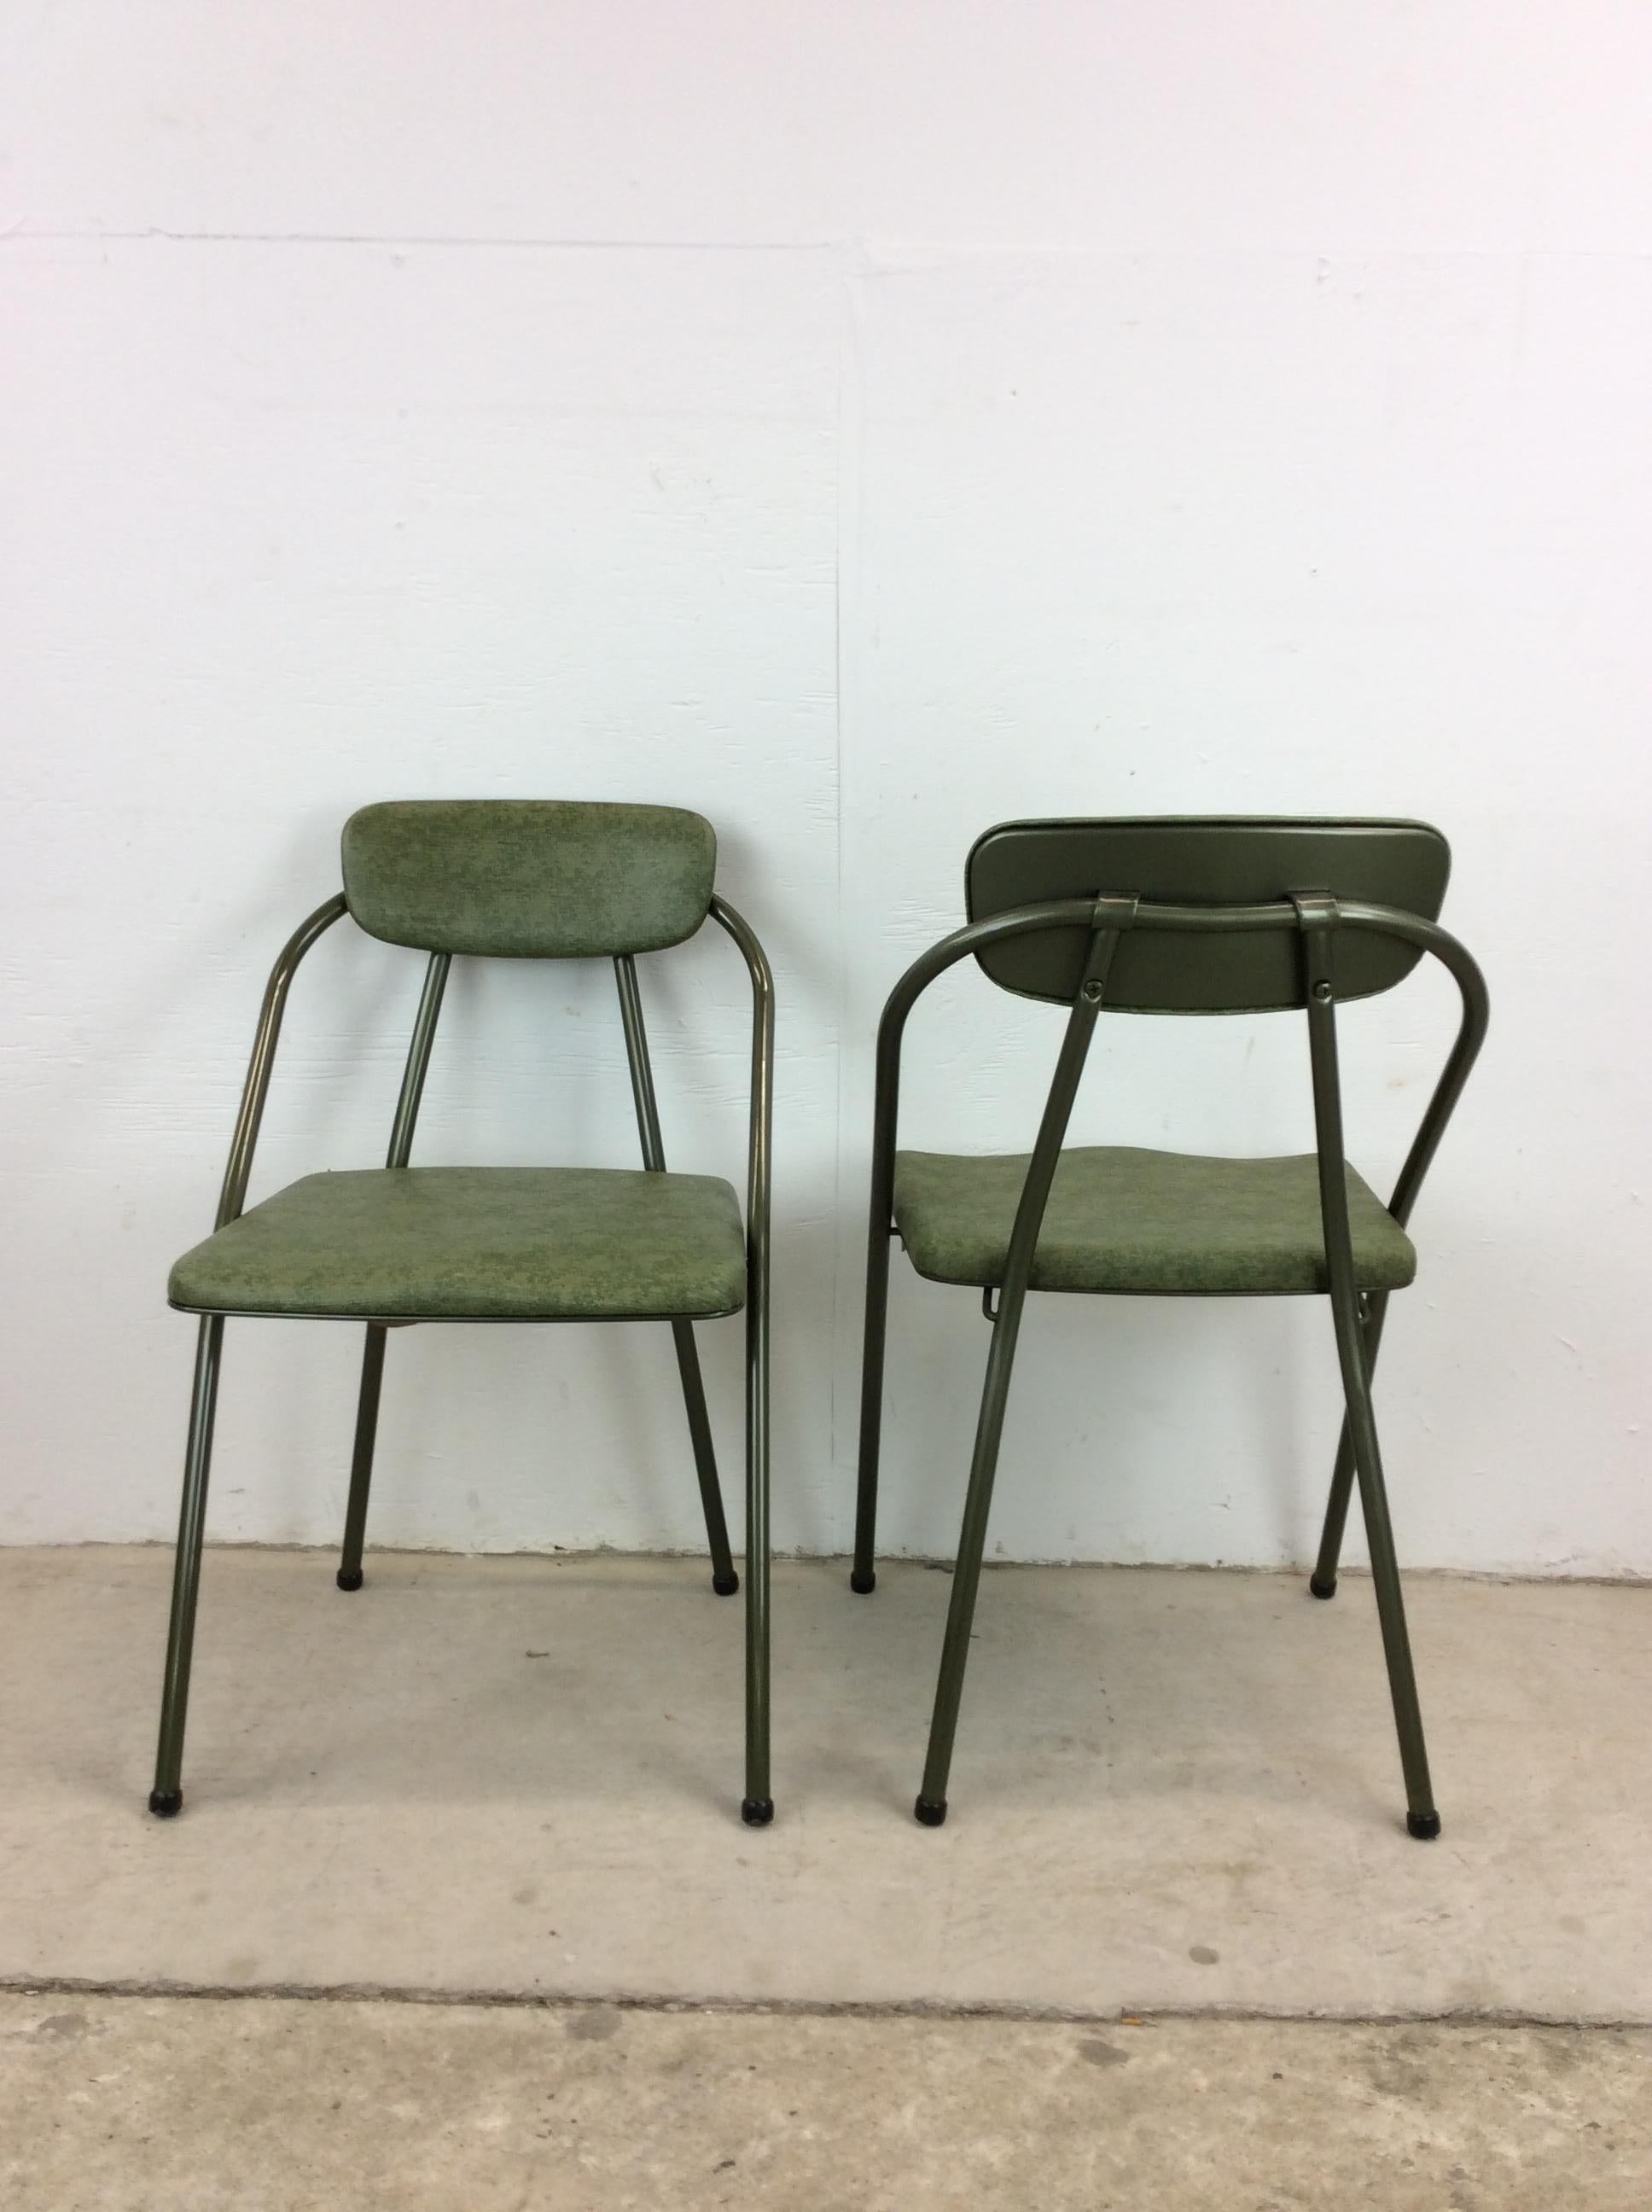 20th Century Mid Century Modern Folding Chairs with Green Vinyl by Cosco For Sale